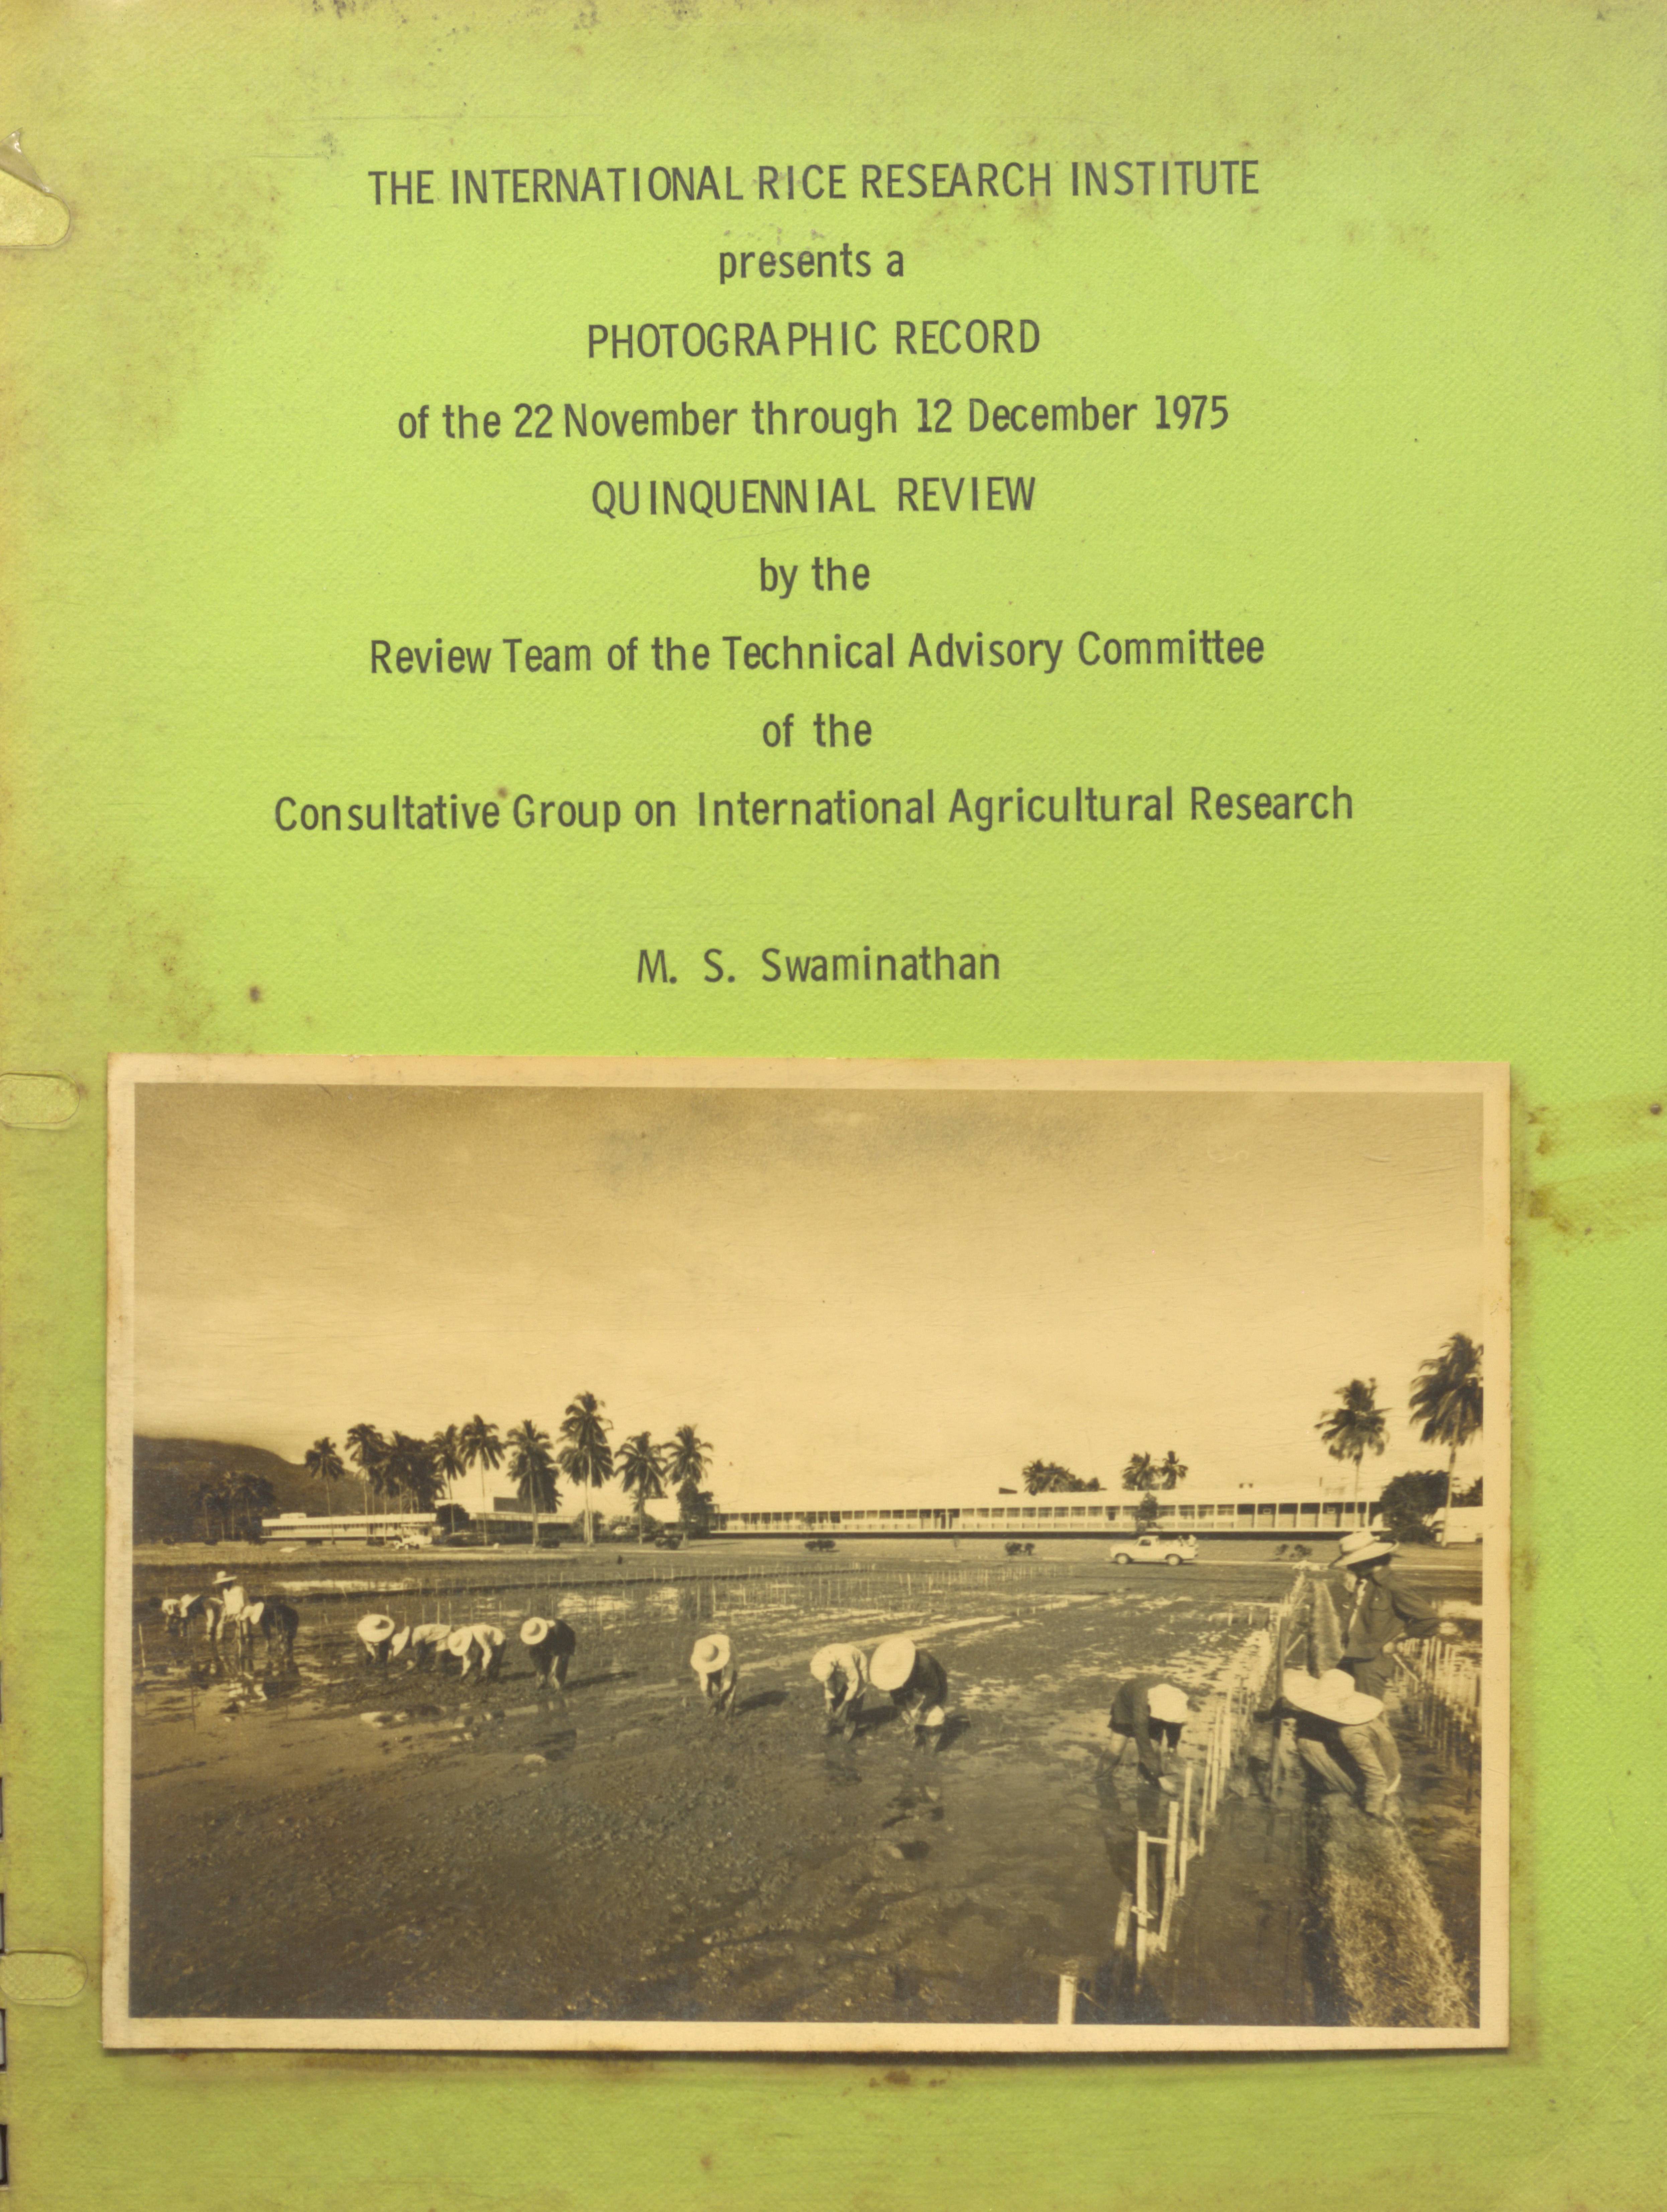 Photographic Record of the International Rice Research Institute